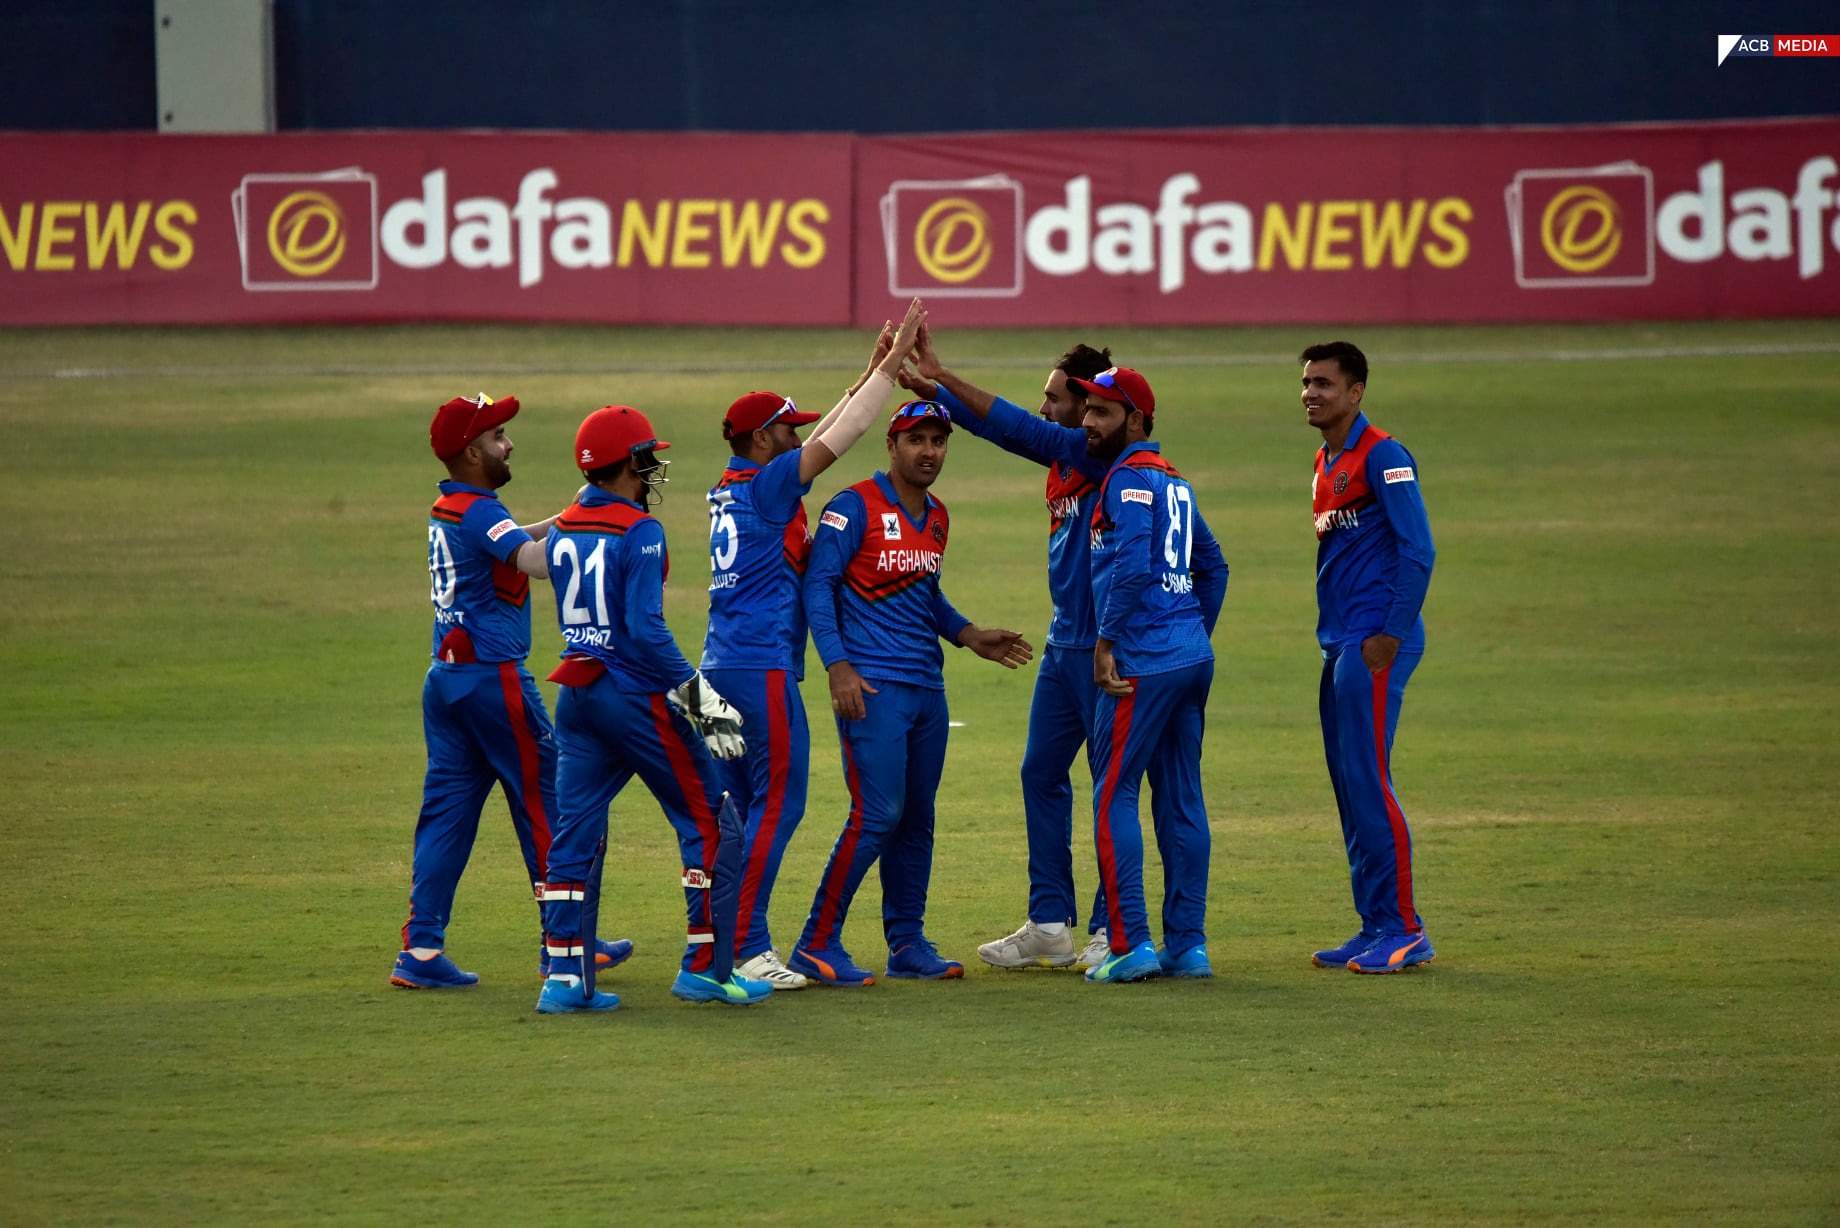 Afghanistan beat Netherlands by 36 in first of 3 ODI match series